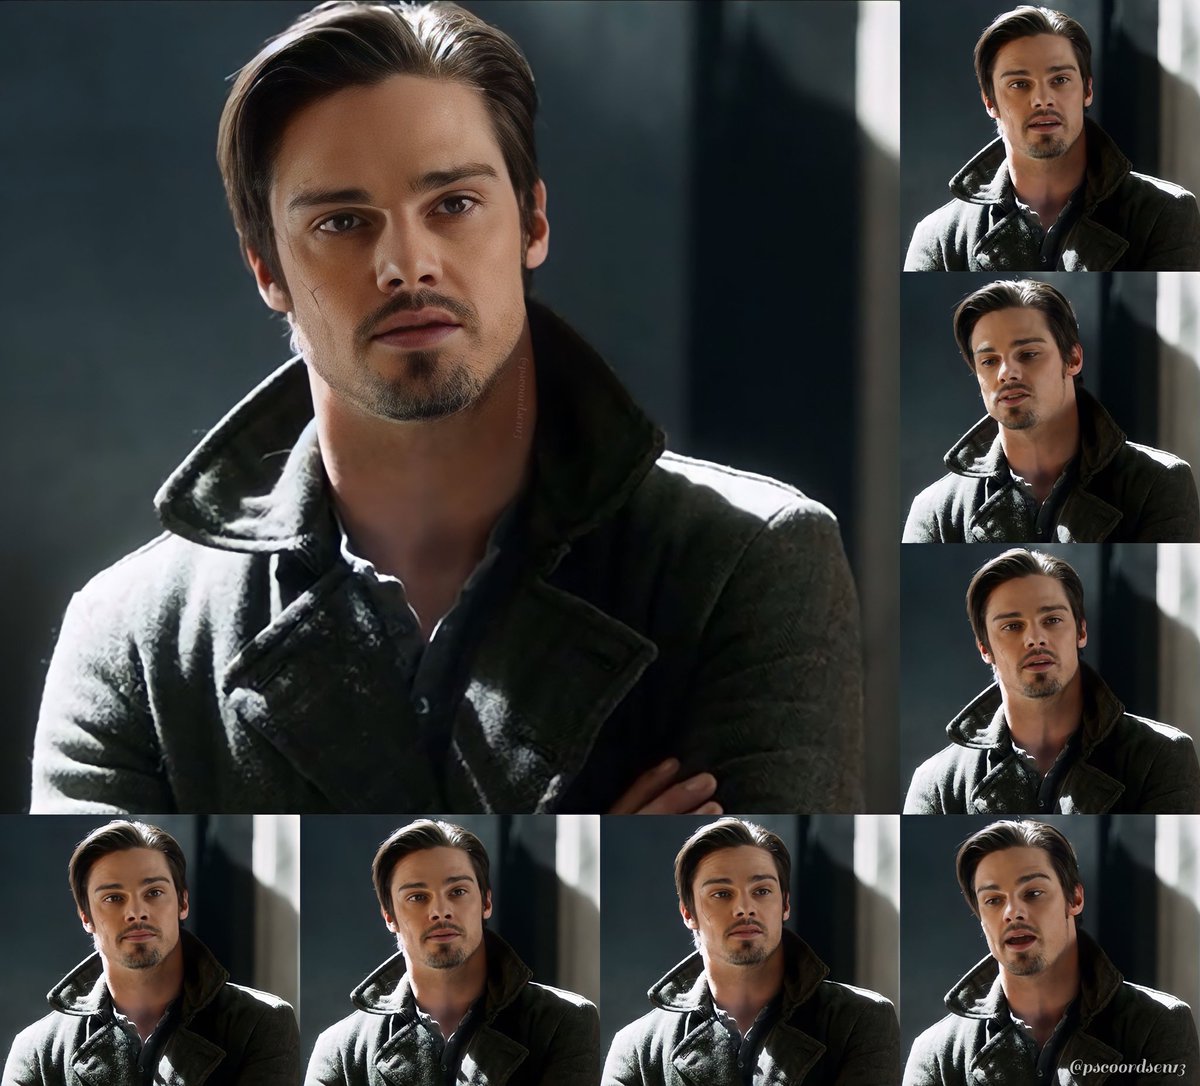 @tbrock623 @57Veronica Hi Tracey😘That’s good. I hope you all have a glorious day🌹🥰💕.

#JustJayRyan #EverydayGorgeous 

#BatB  #BeautyAndTheBeast